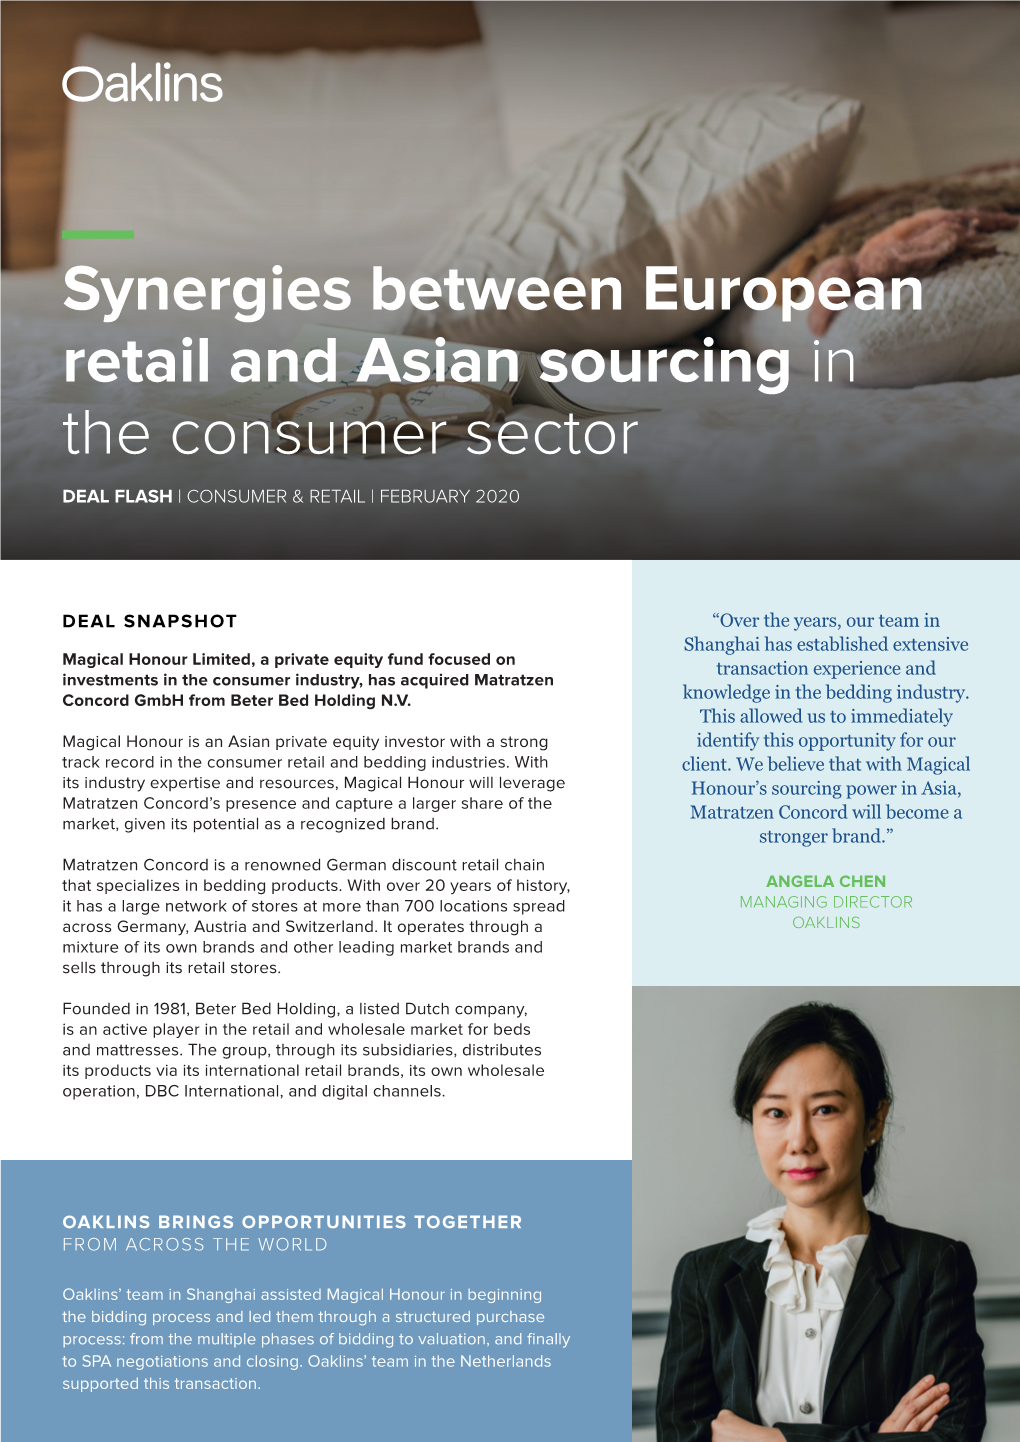 Synergies Between European Retail and Asian Sourcing in the Consumer Sector